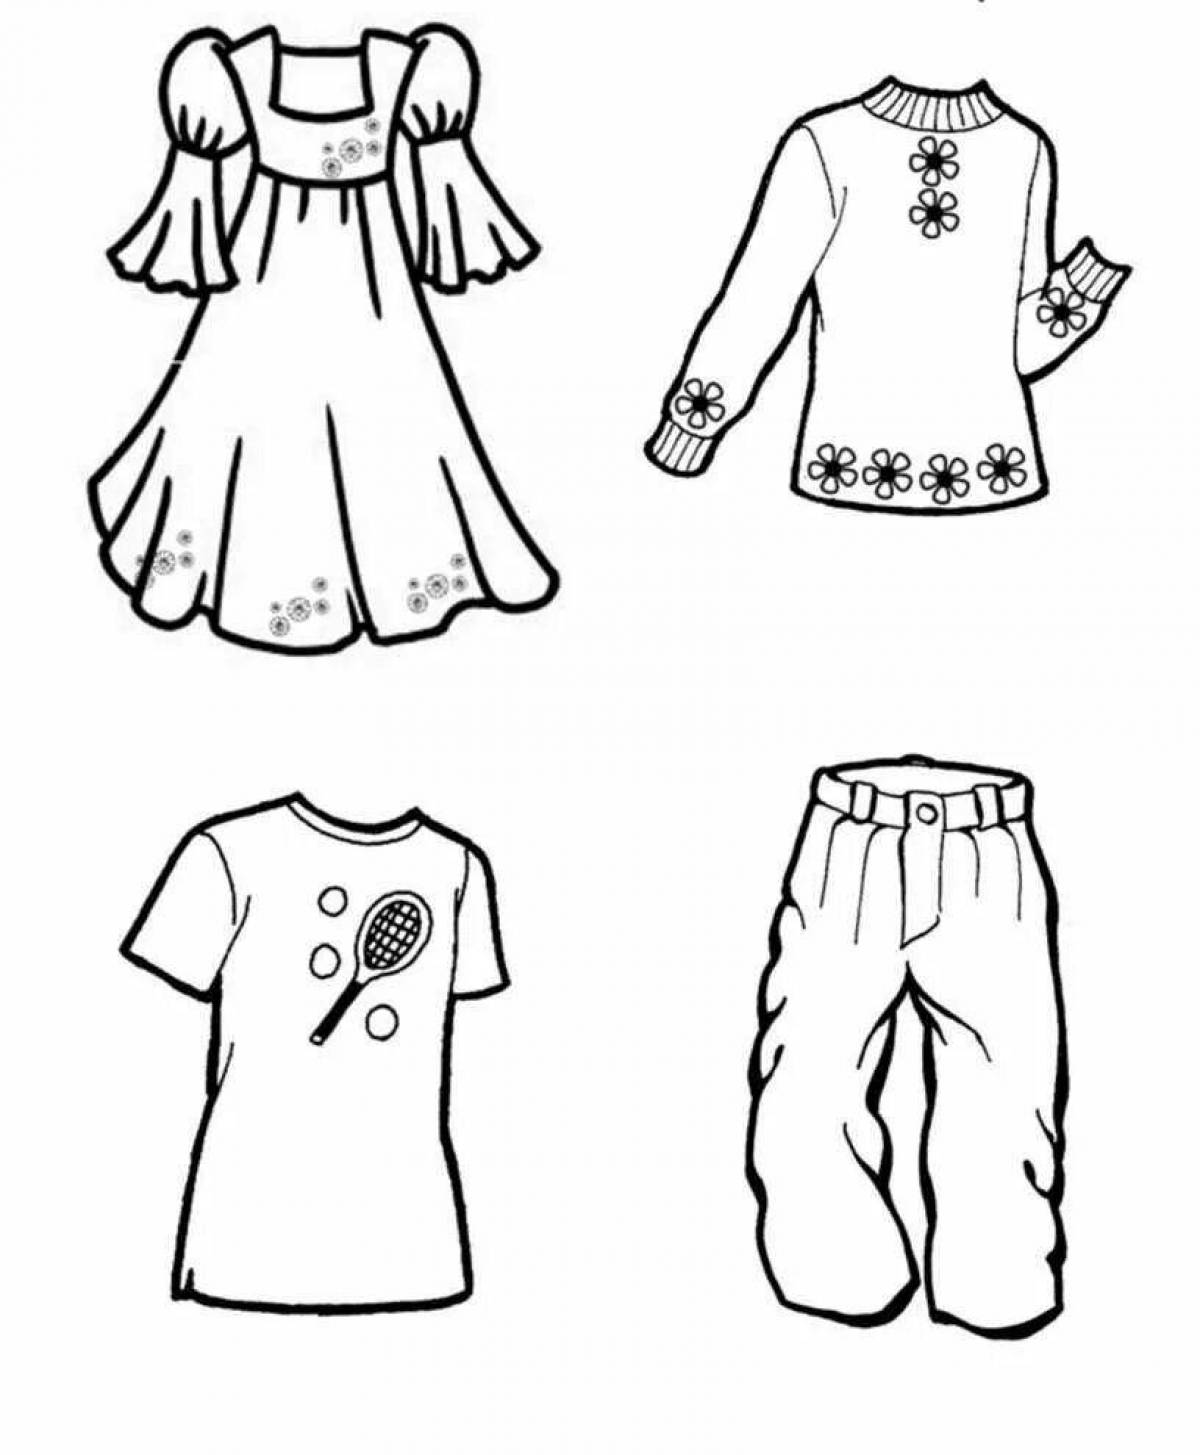 Adorable coloring book for children's clothing